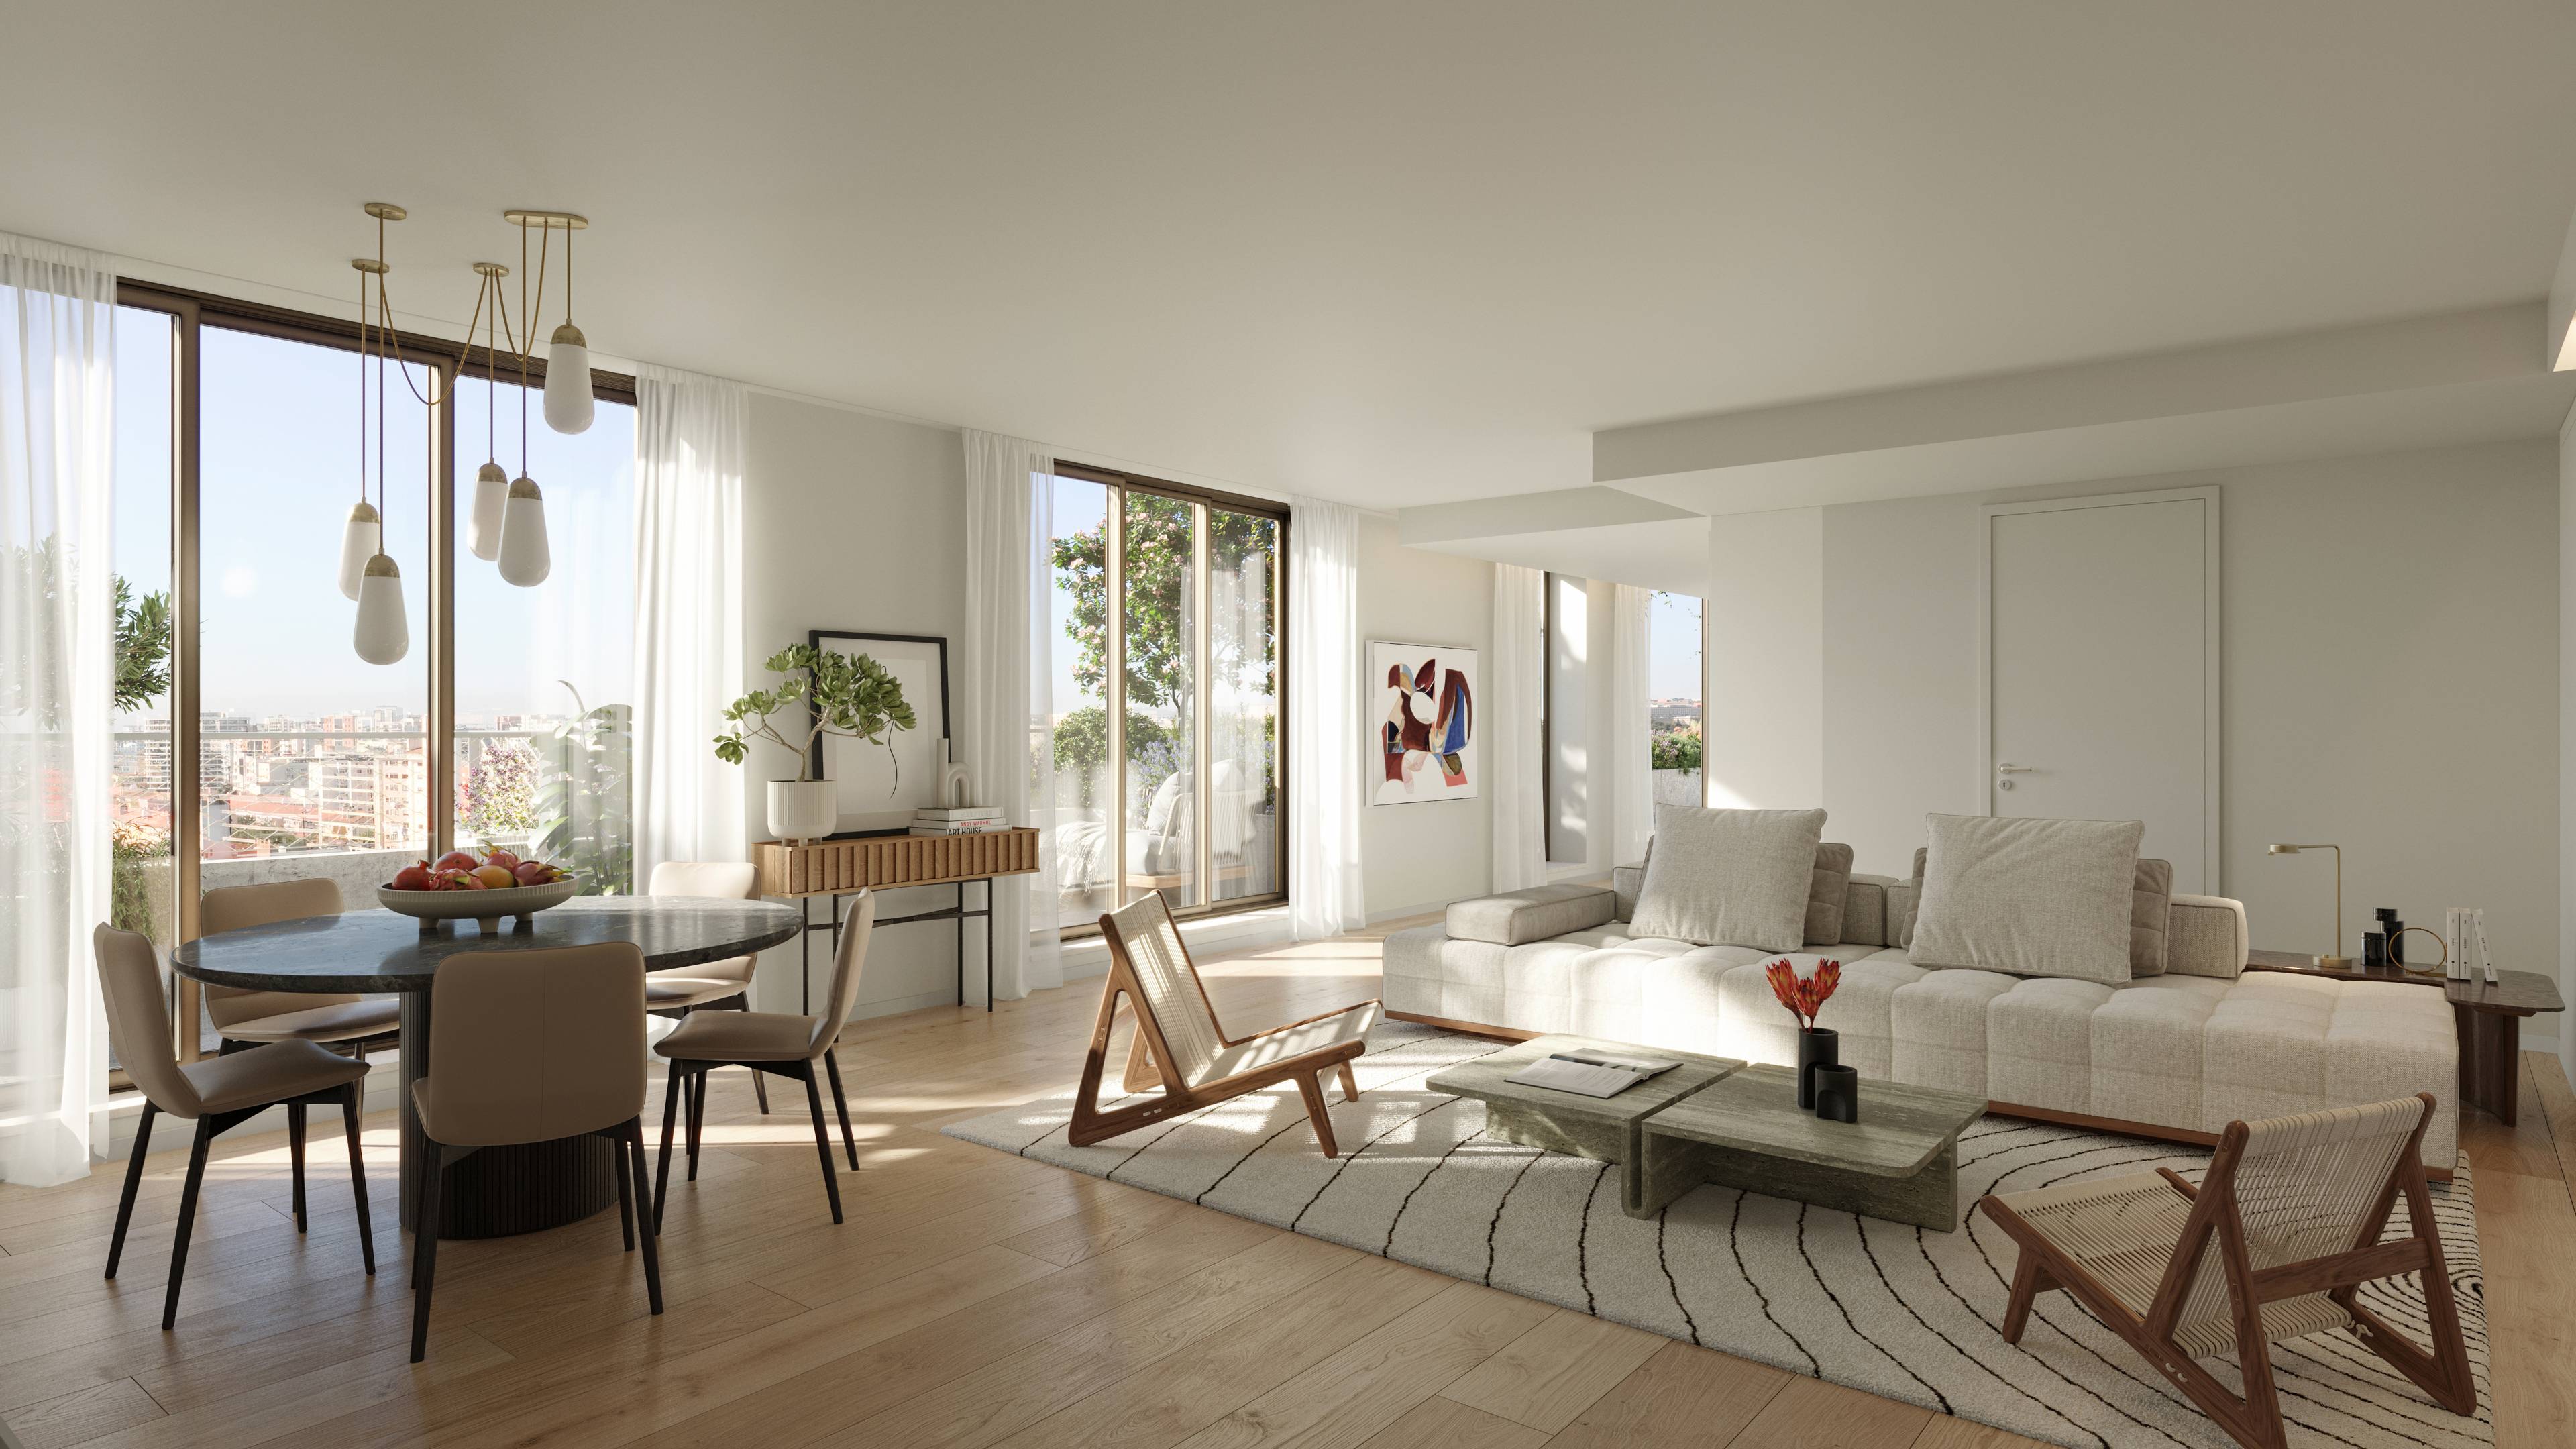 TWO BEDROOM APARTMENT WITH TERRACE | NEW PREMIUM DEVELOPMENT IN CENTRAL LISBON